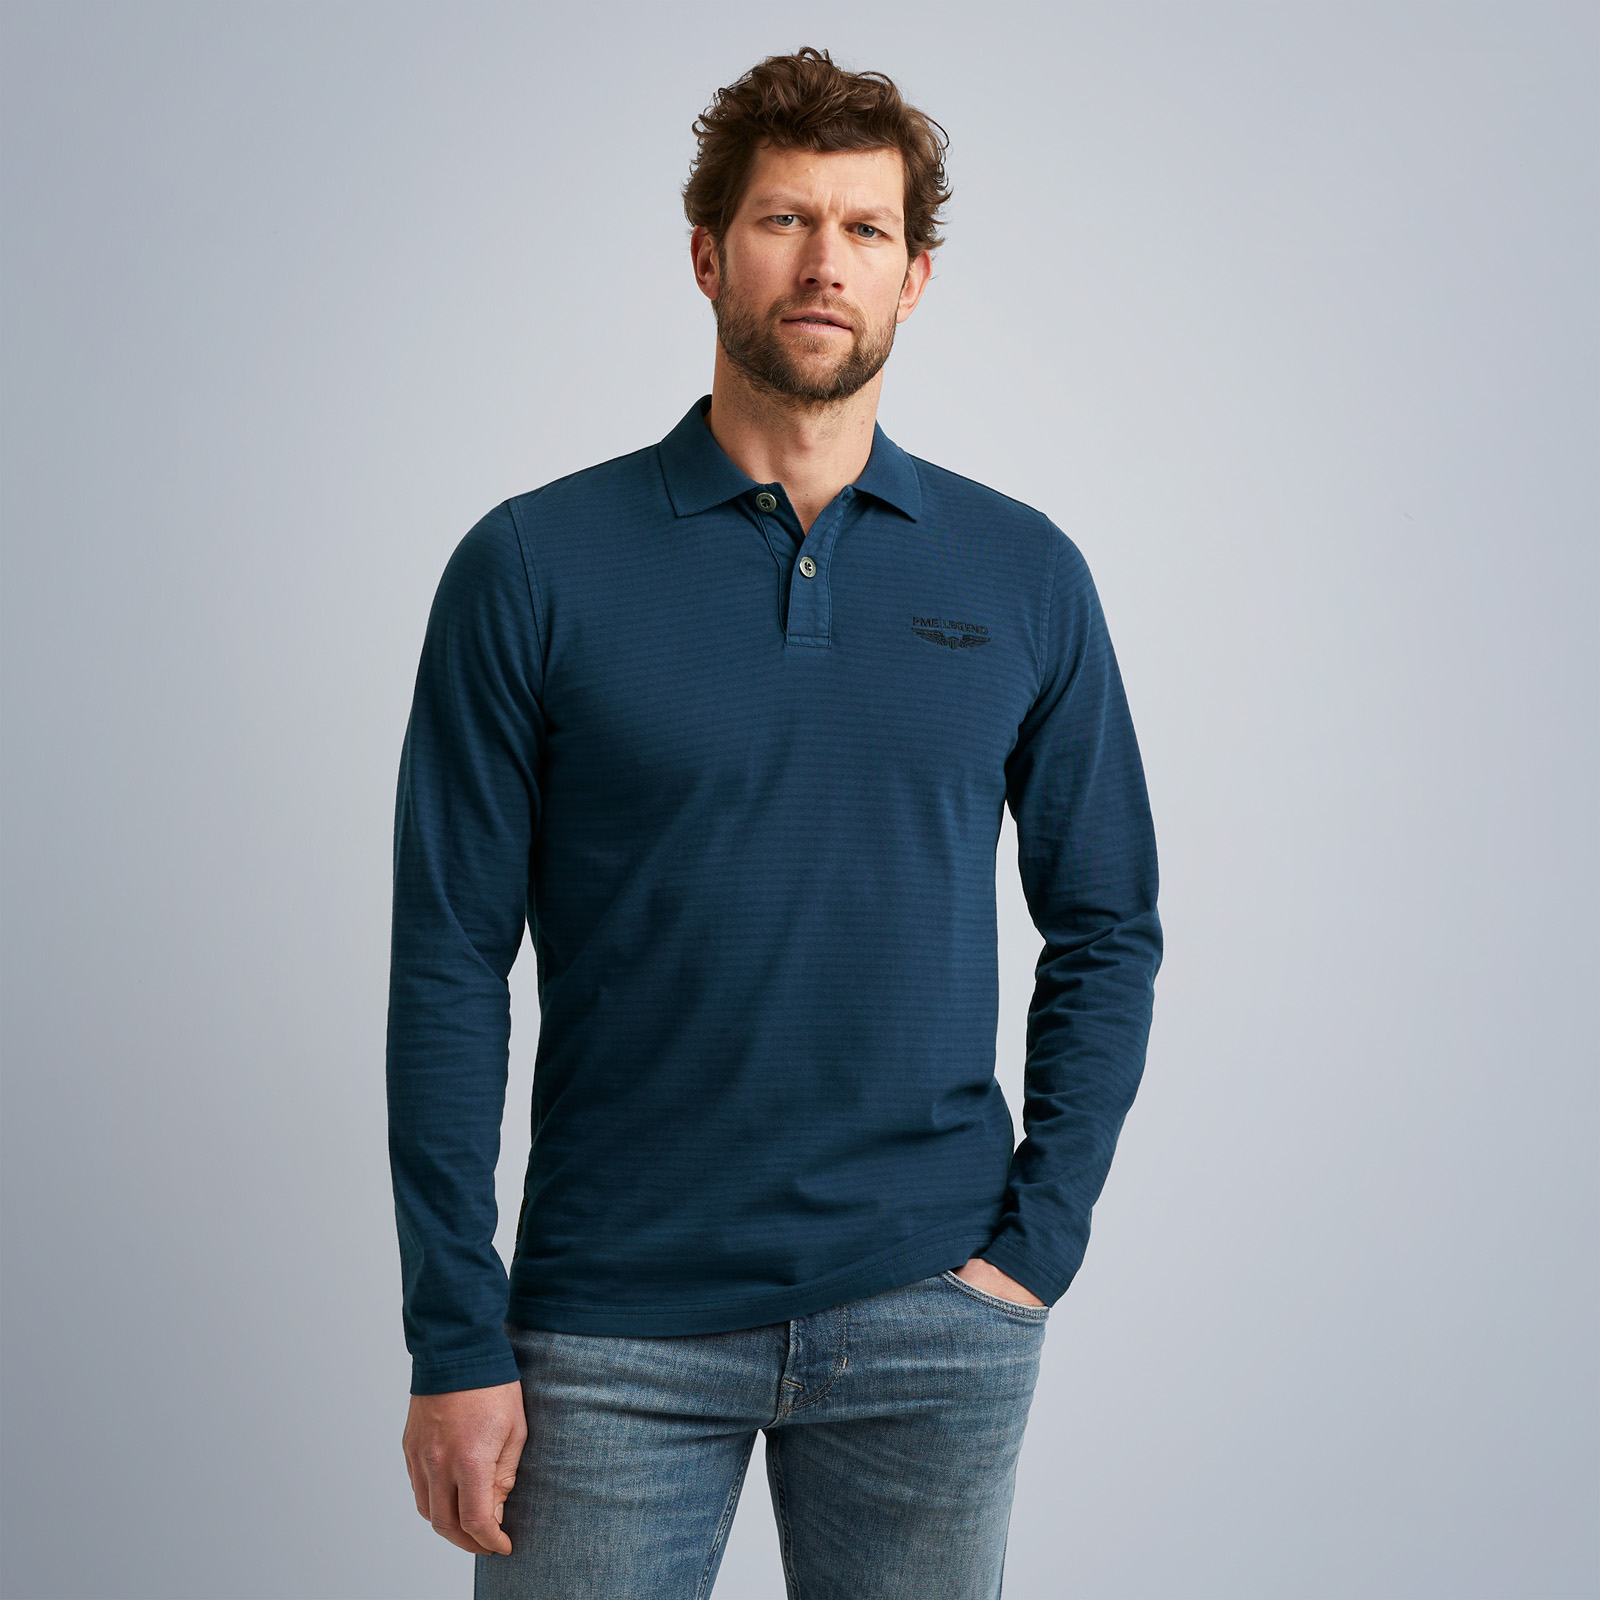 PME LEGEND | Polo shirt with long sleeves | Free shipping and returns